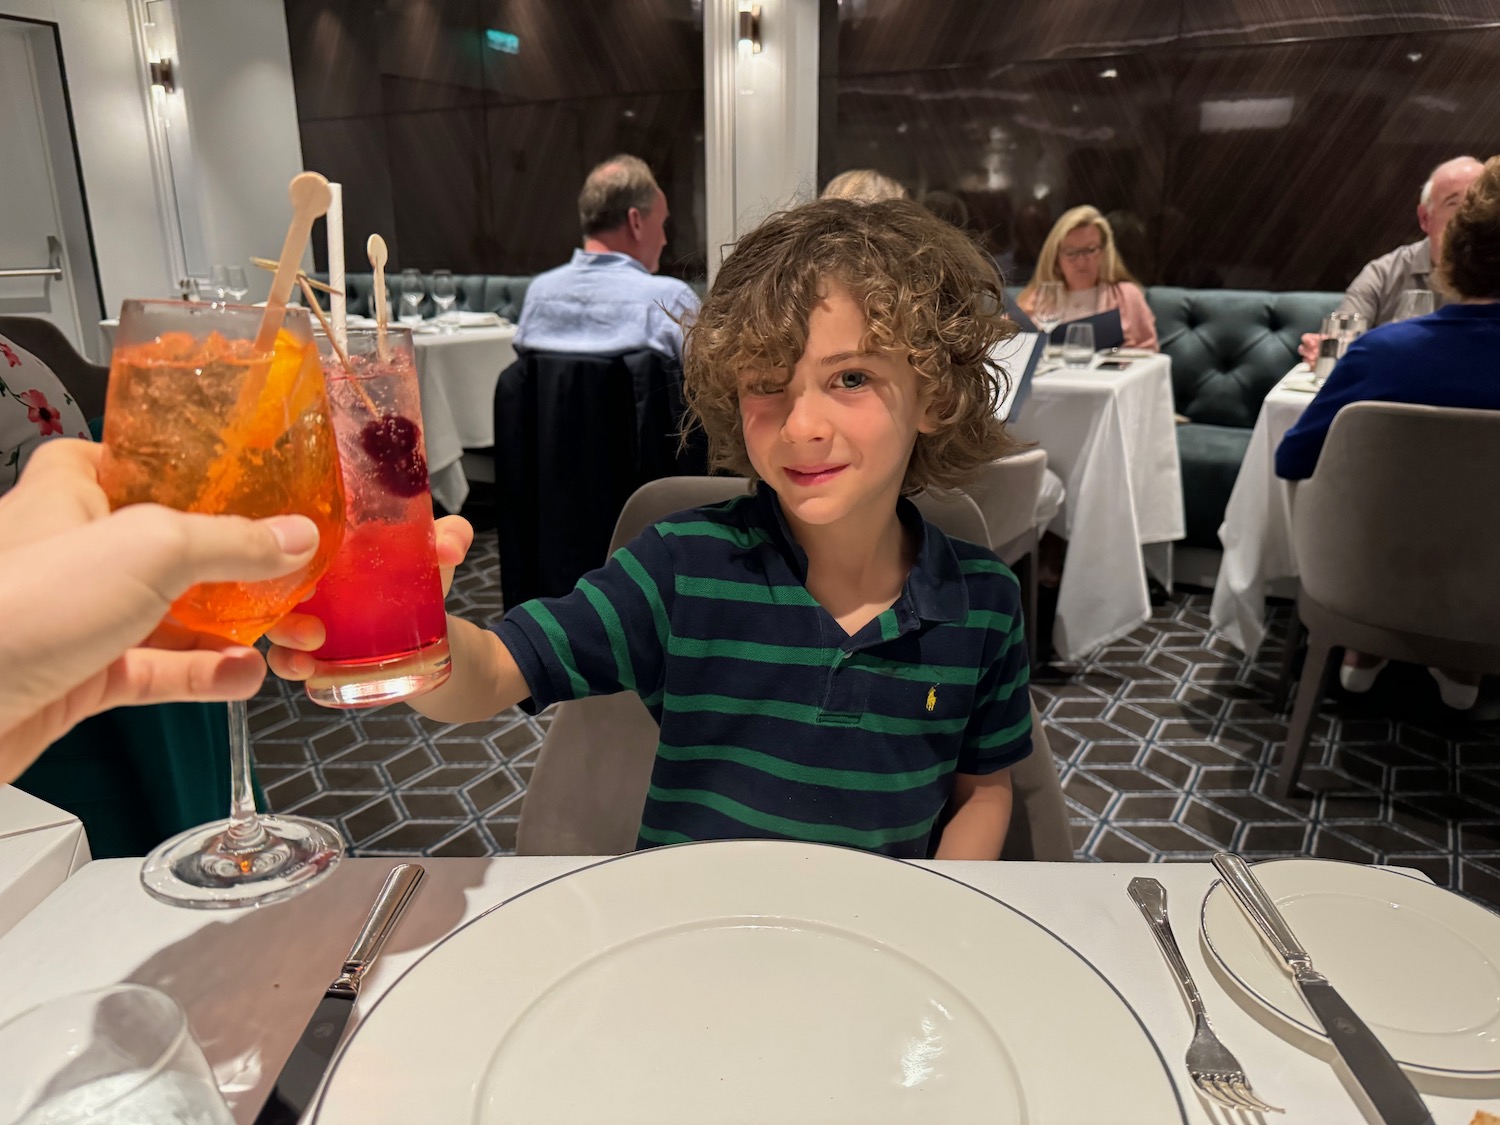 a boy holding drinks in a restaurant